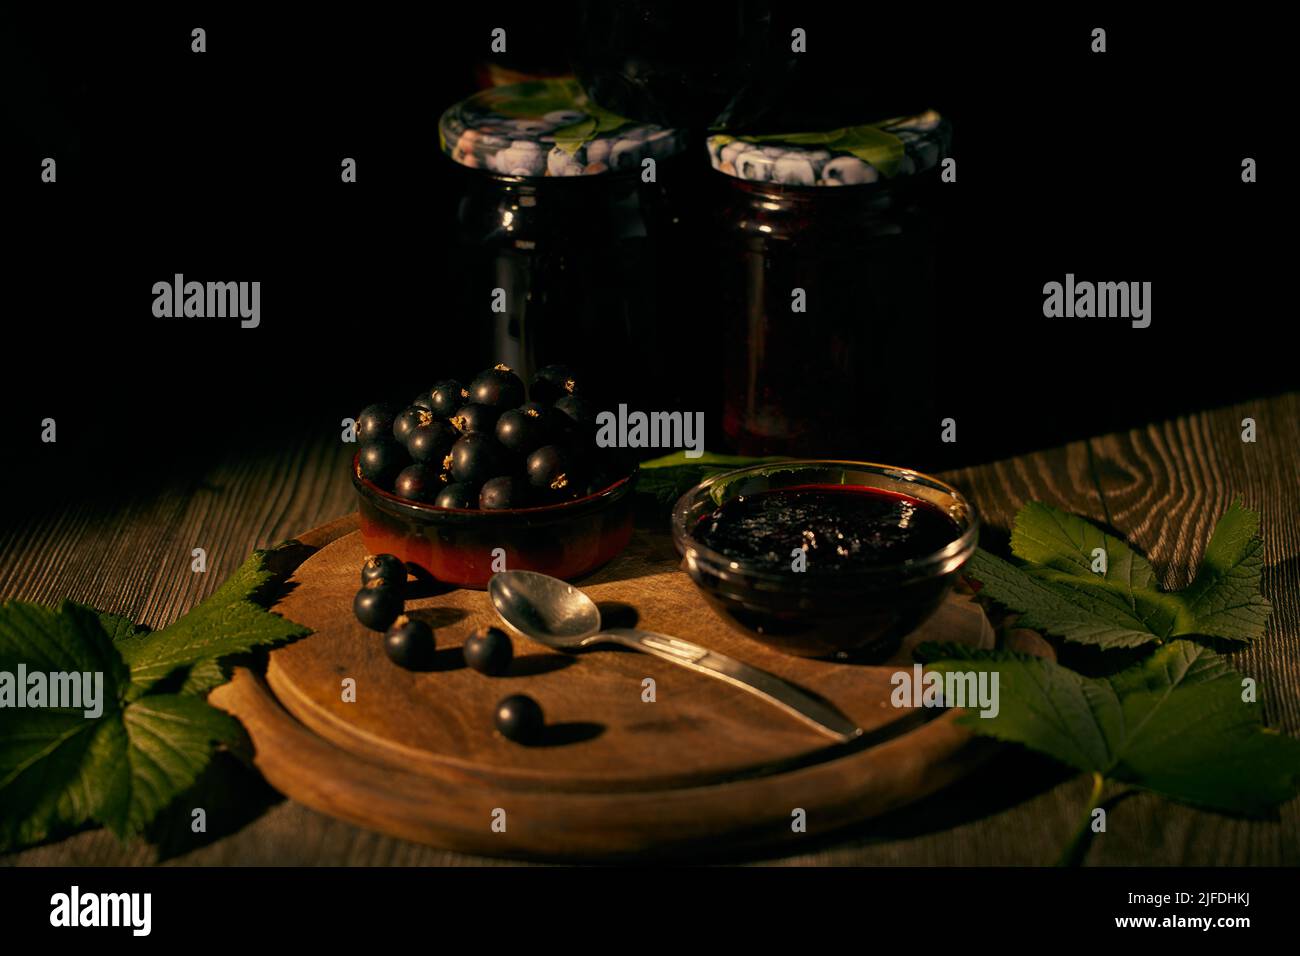 Blackcurrant in a ceramic bowl and blackcurrant jam in a glass bowl on a wooden board with green currant leaves and glass jars of jam in the backgroun Stock Photo